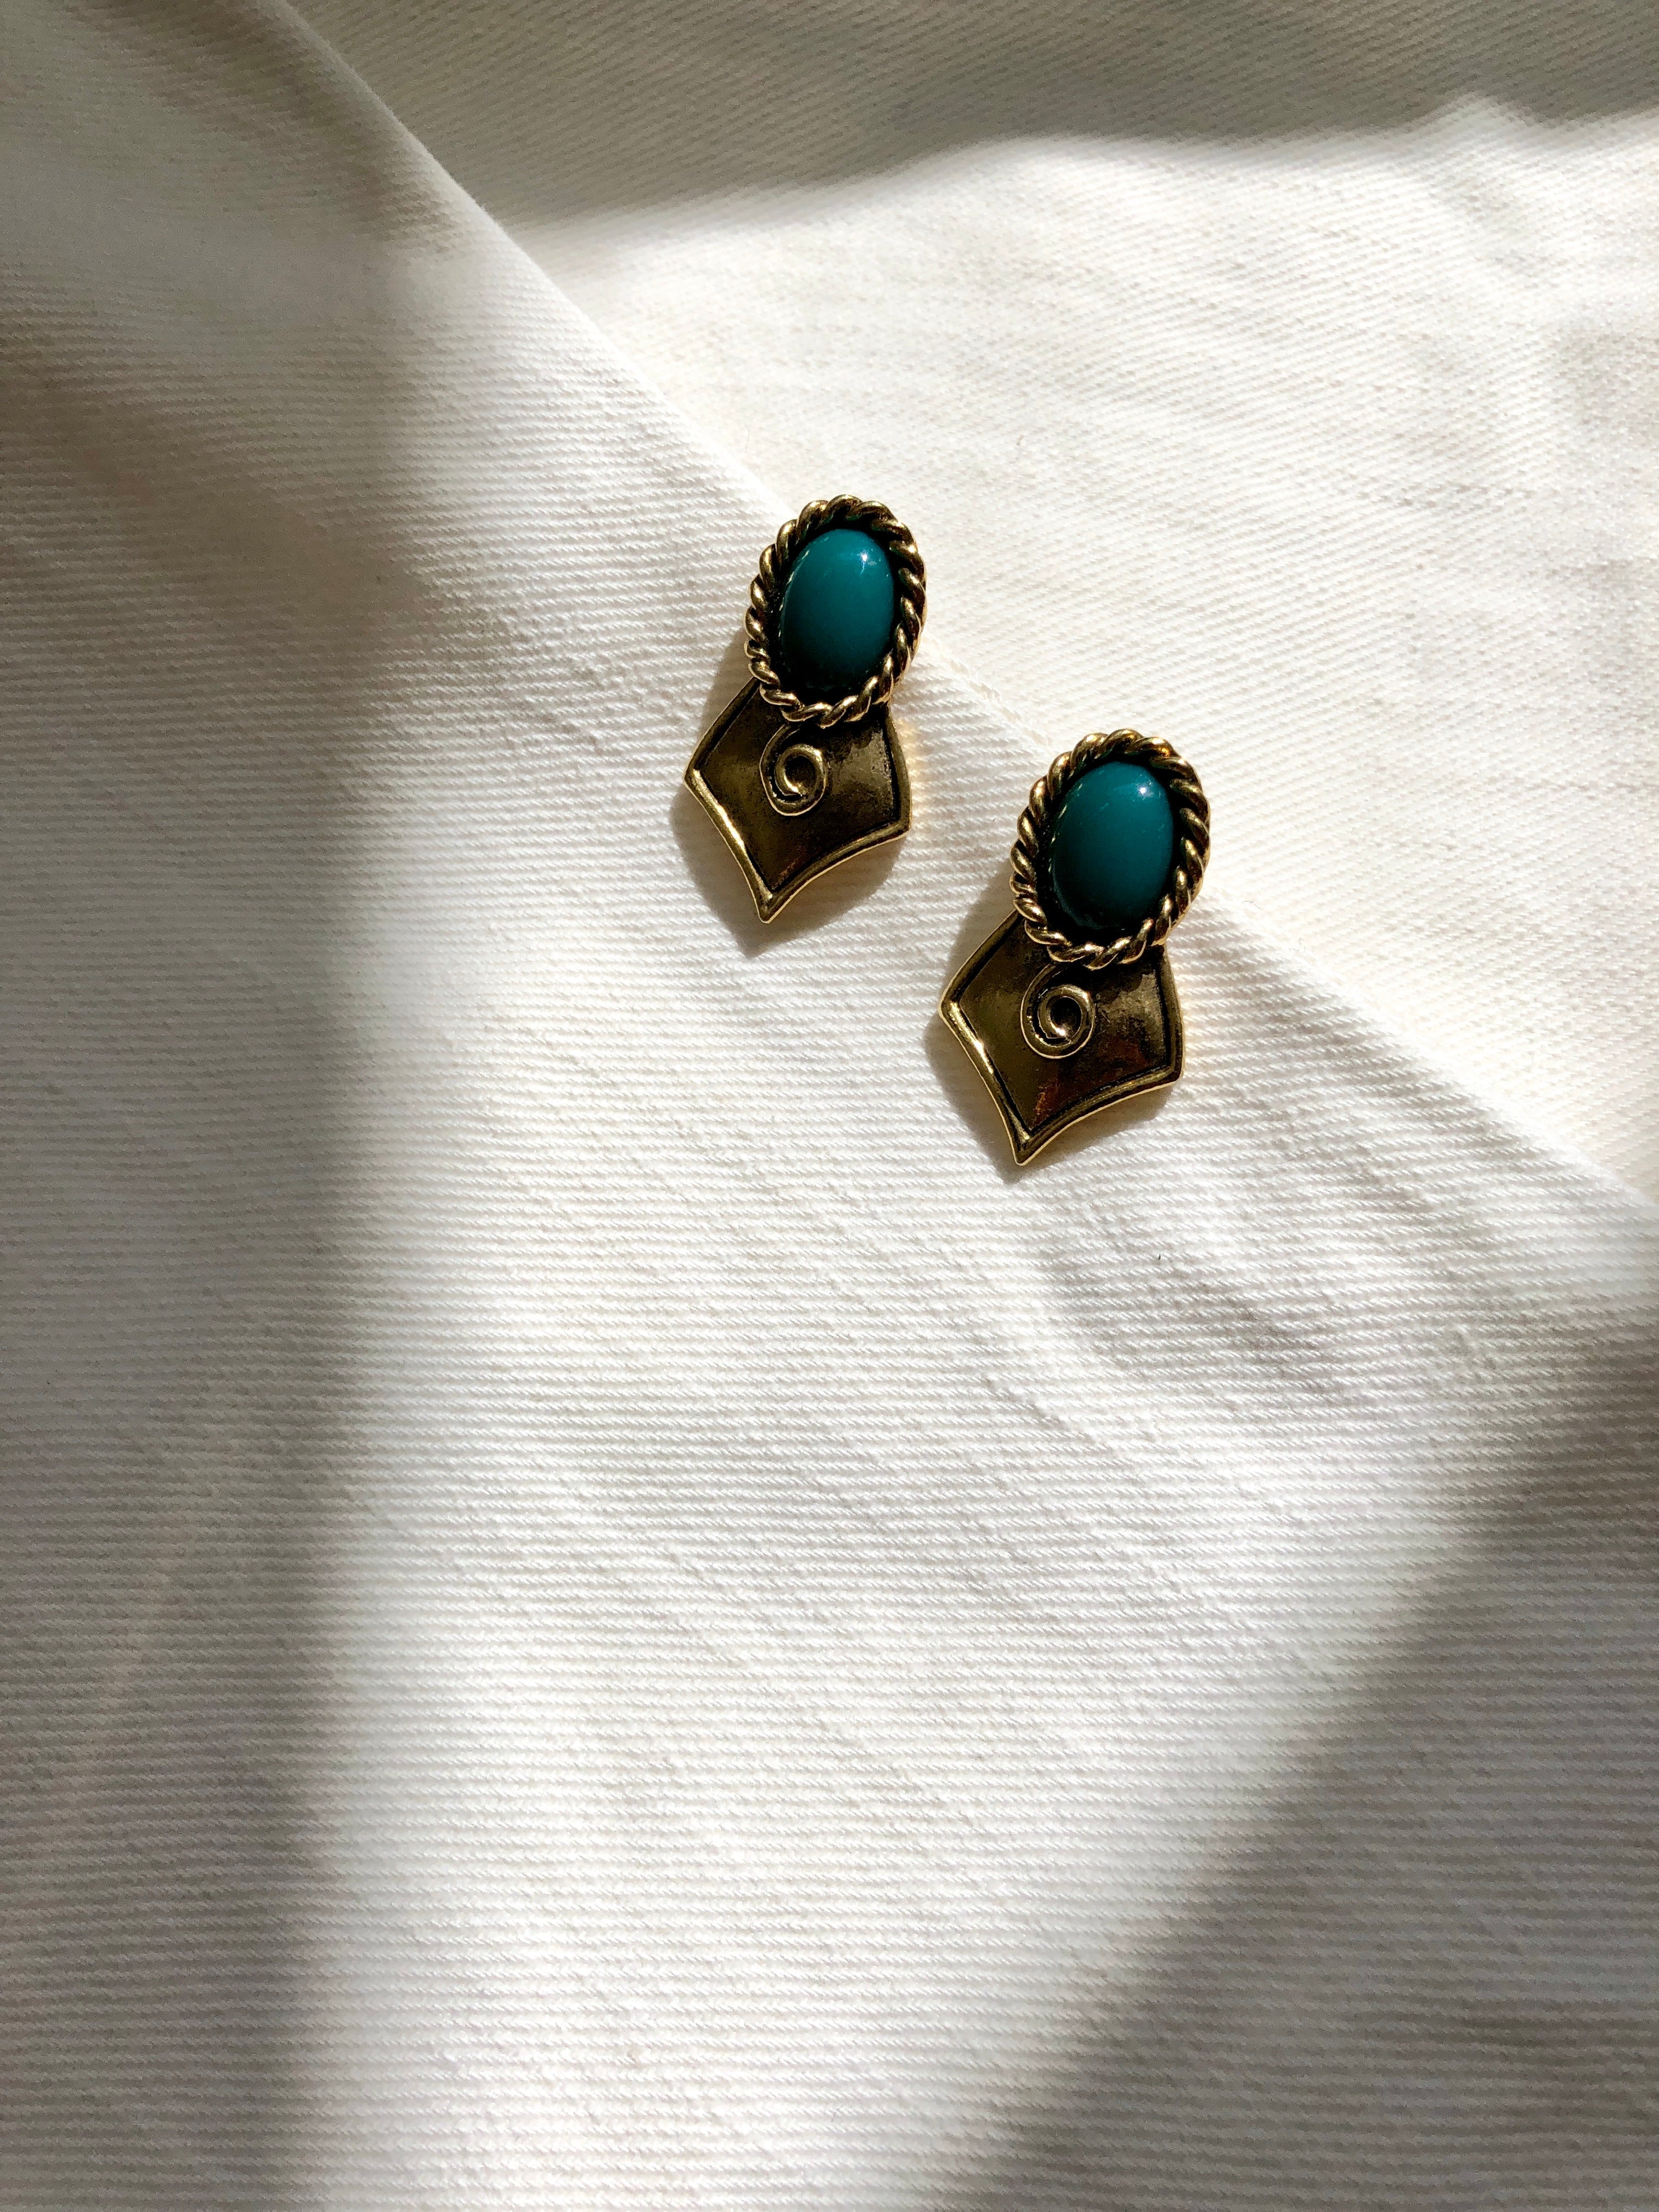 Vintage Statement Earrings with Blur Gem